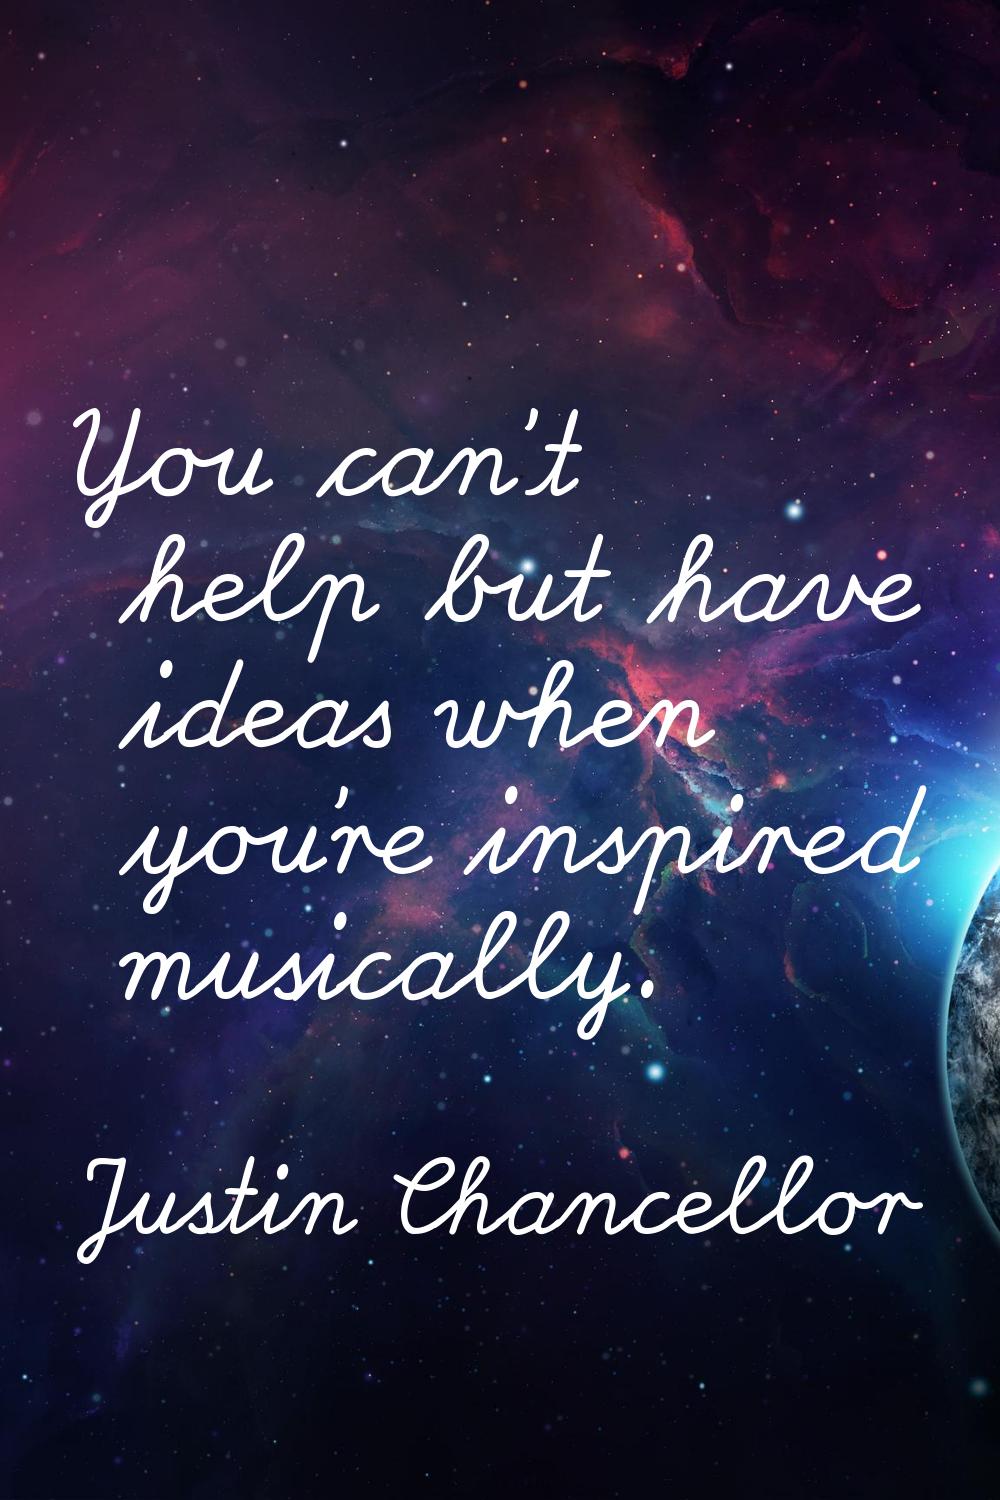 You can't help but have ideas when you're inspired musically.